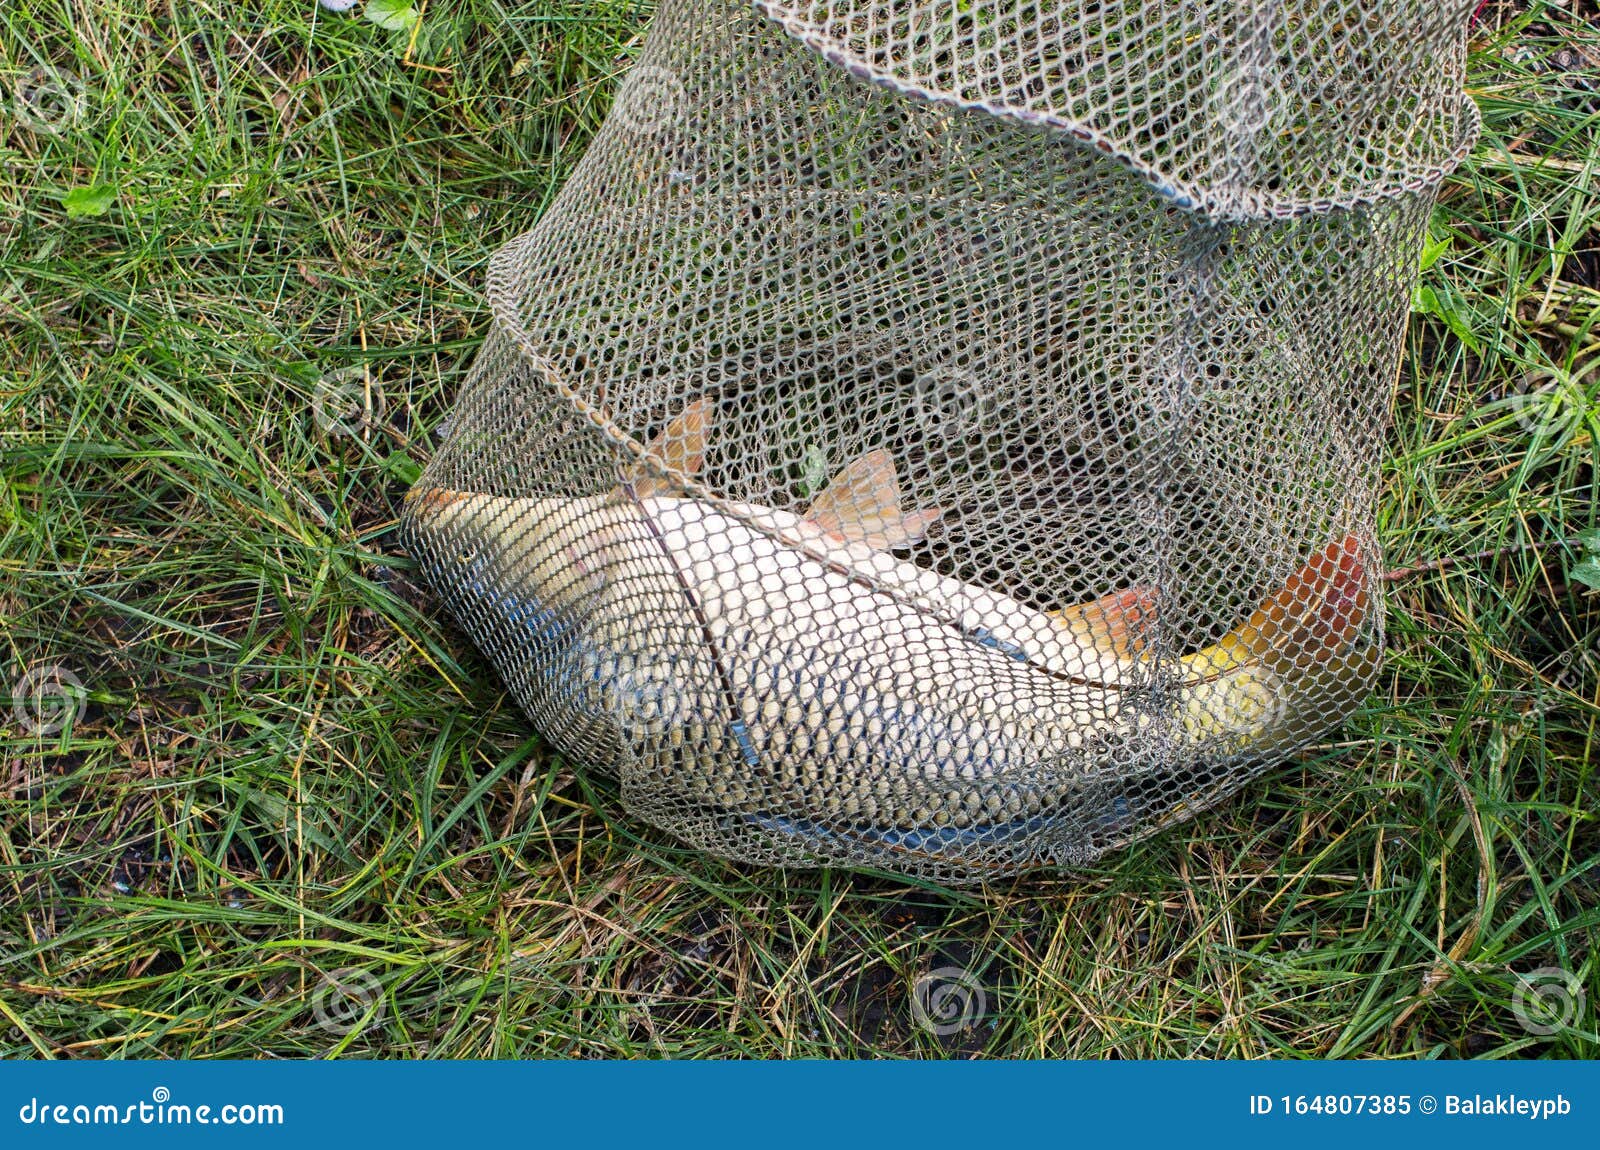 Large Carp Fish Caught in a Lake Stock Image - Image of grass